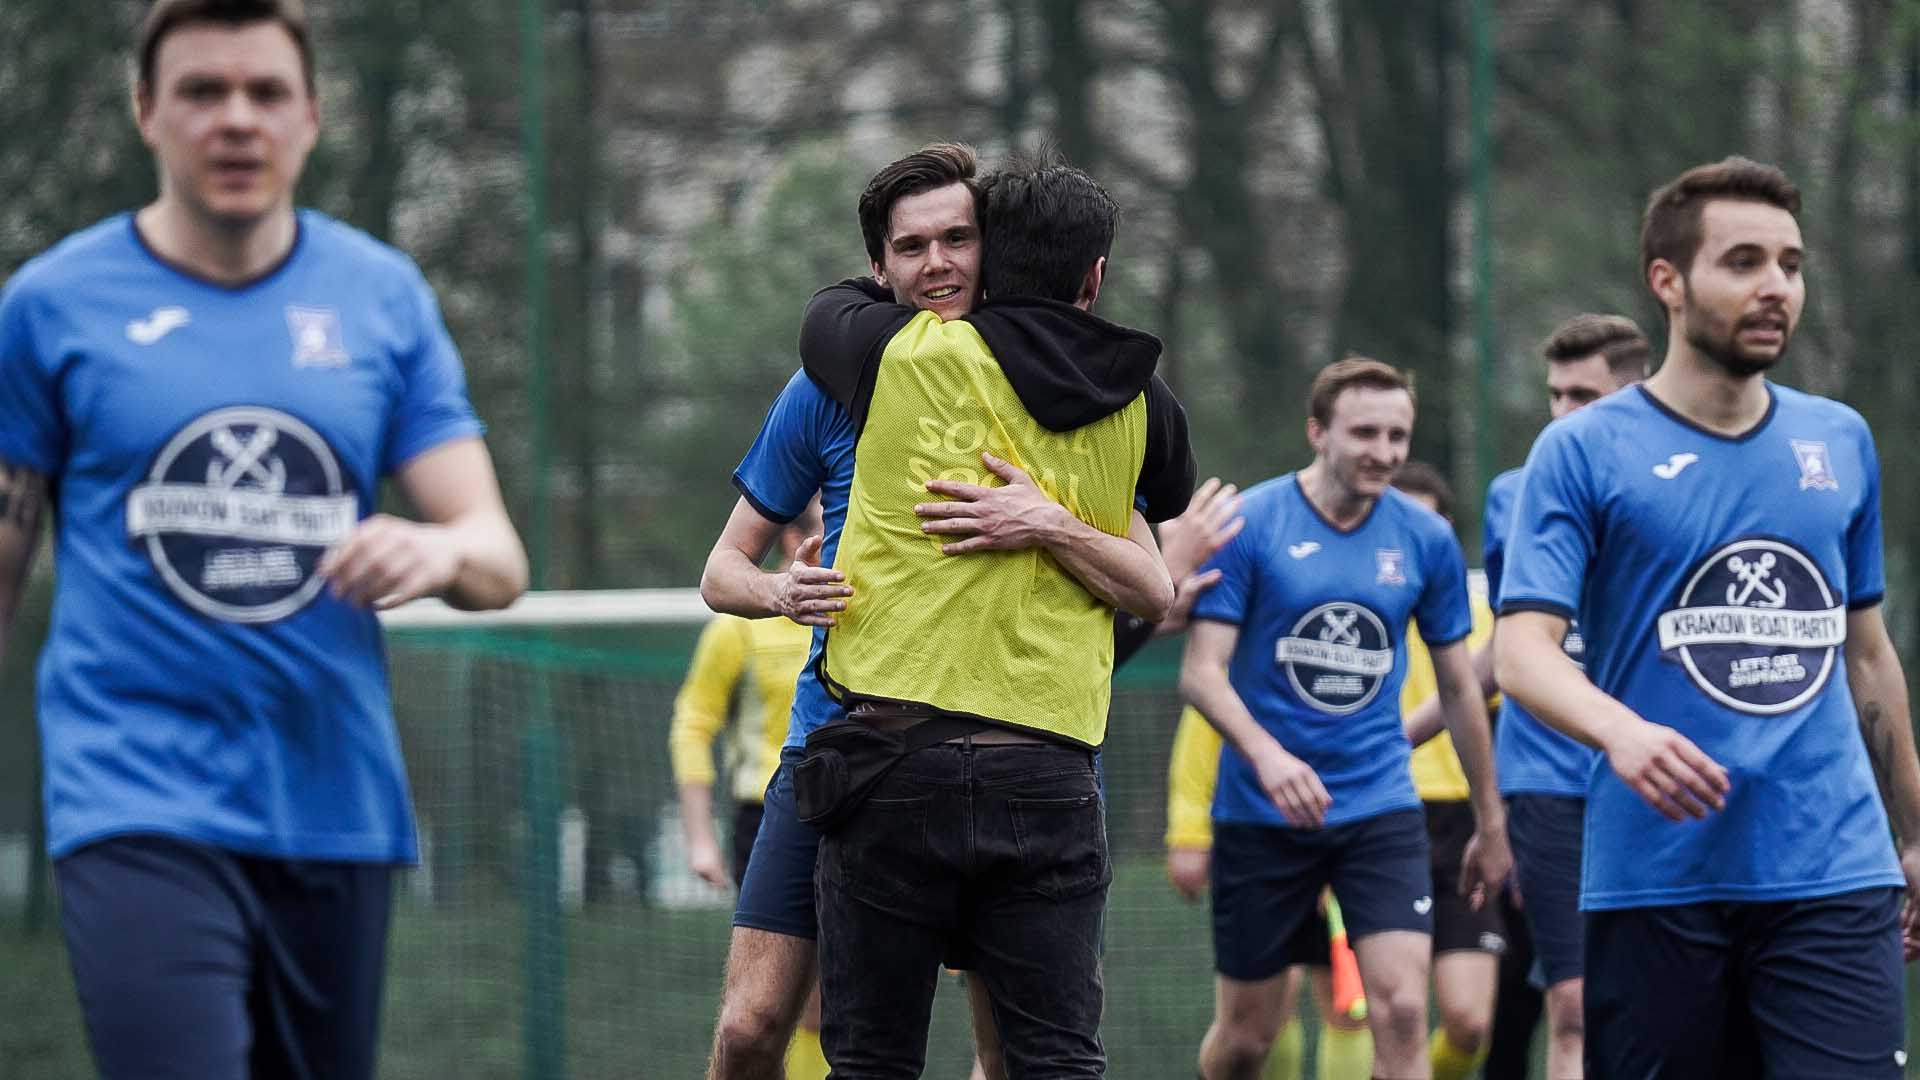 Krakow Dragoons FC celebrating a win after match